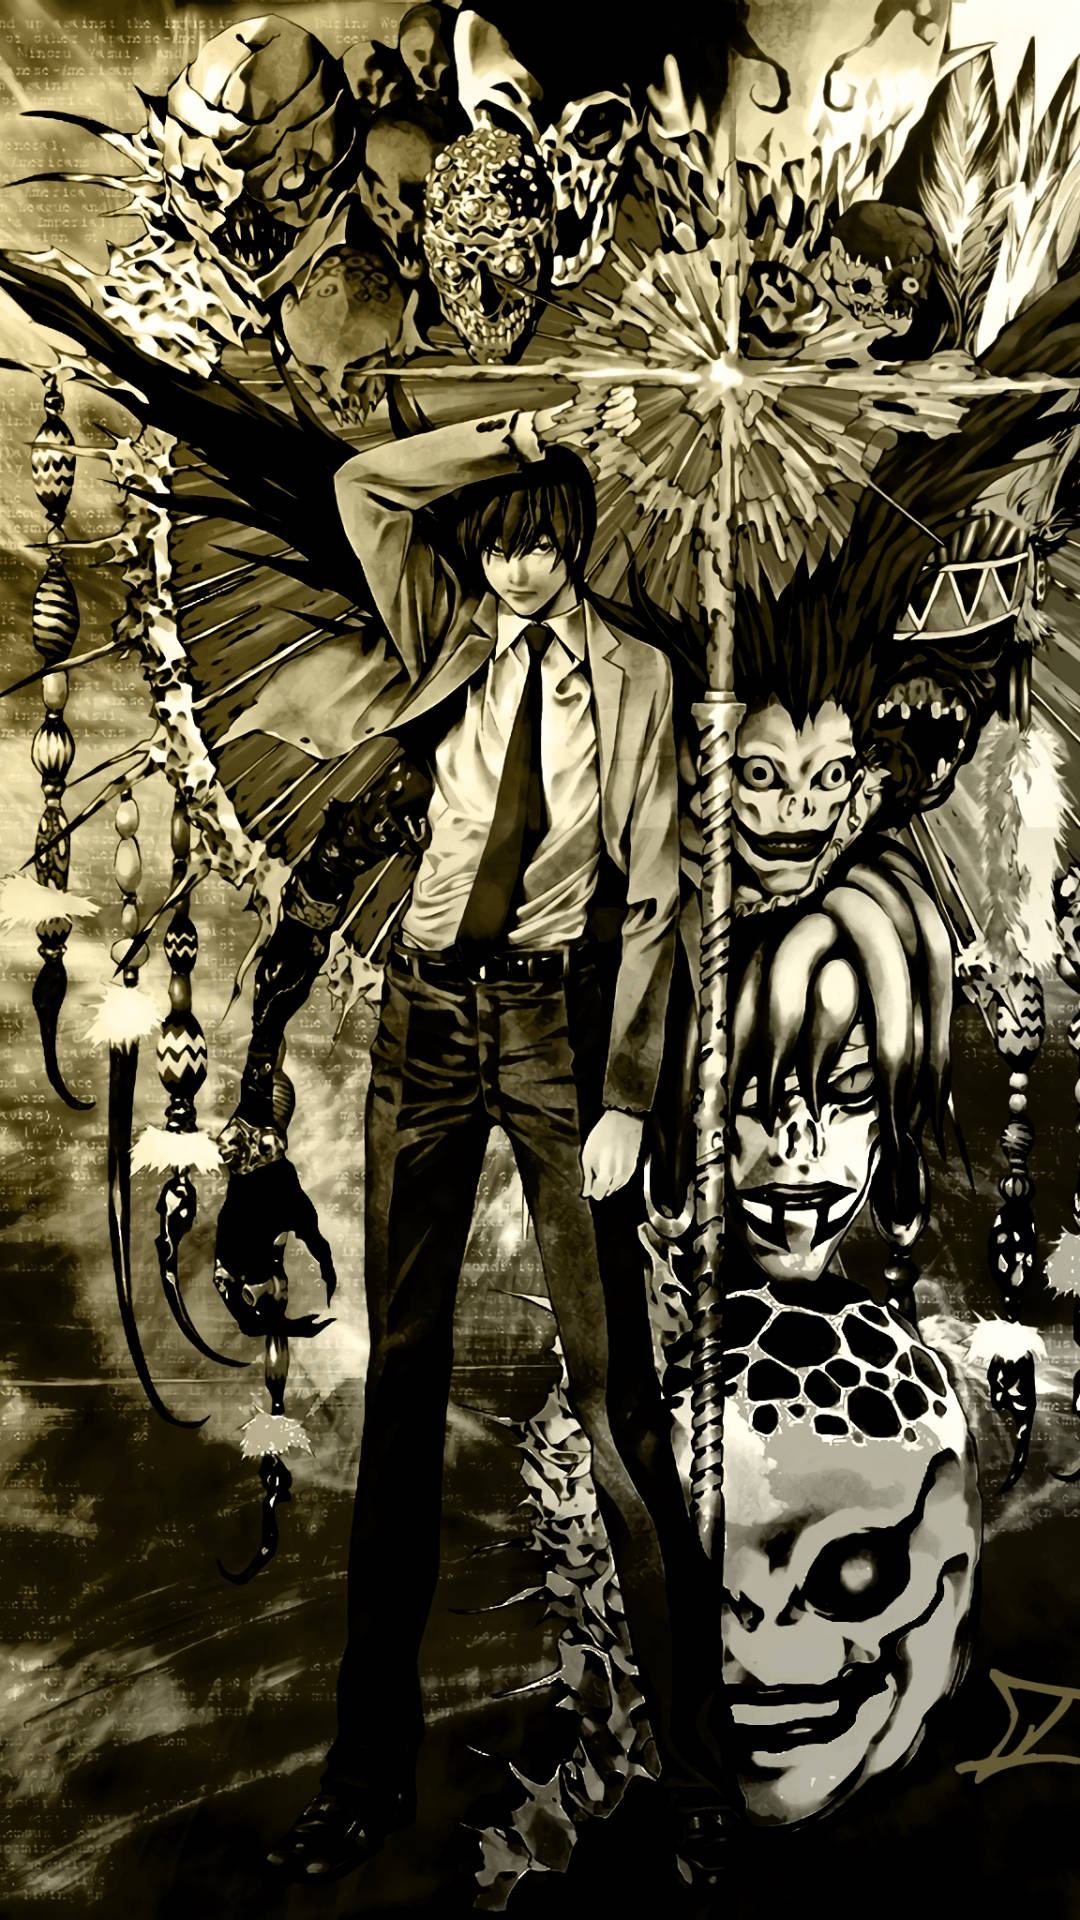 Follow the rules of the Shinigami and you will be granted power to take lives. Wallpaper